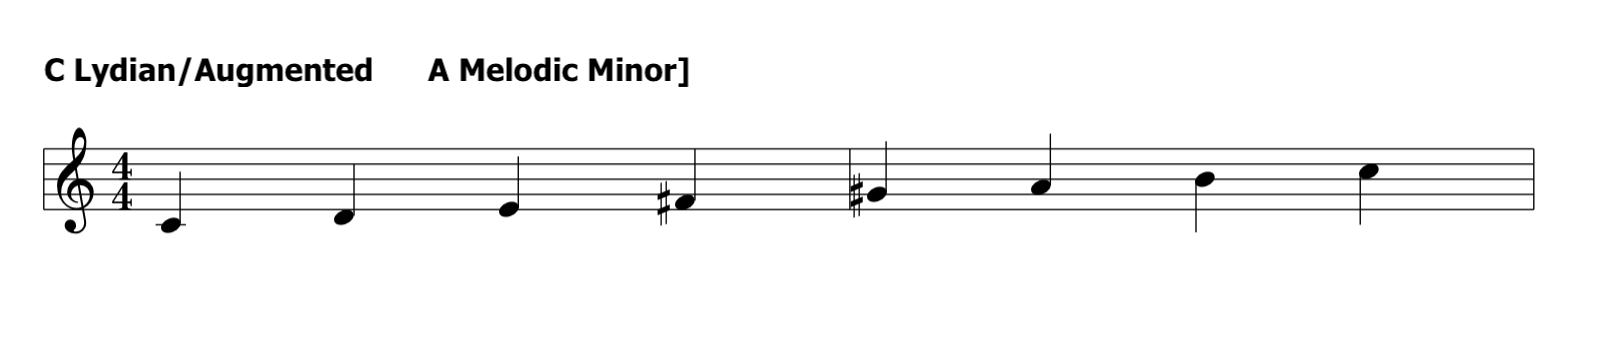 Melodic Minor Modes Transpsosed. With C as parent key.